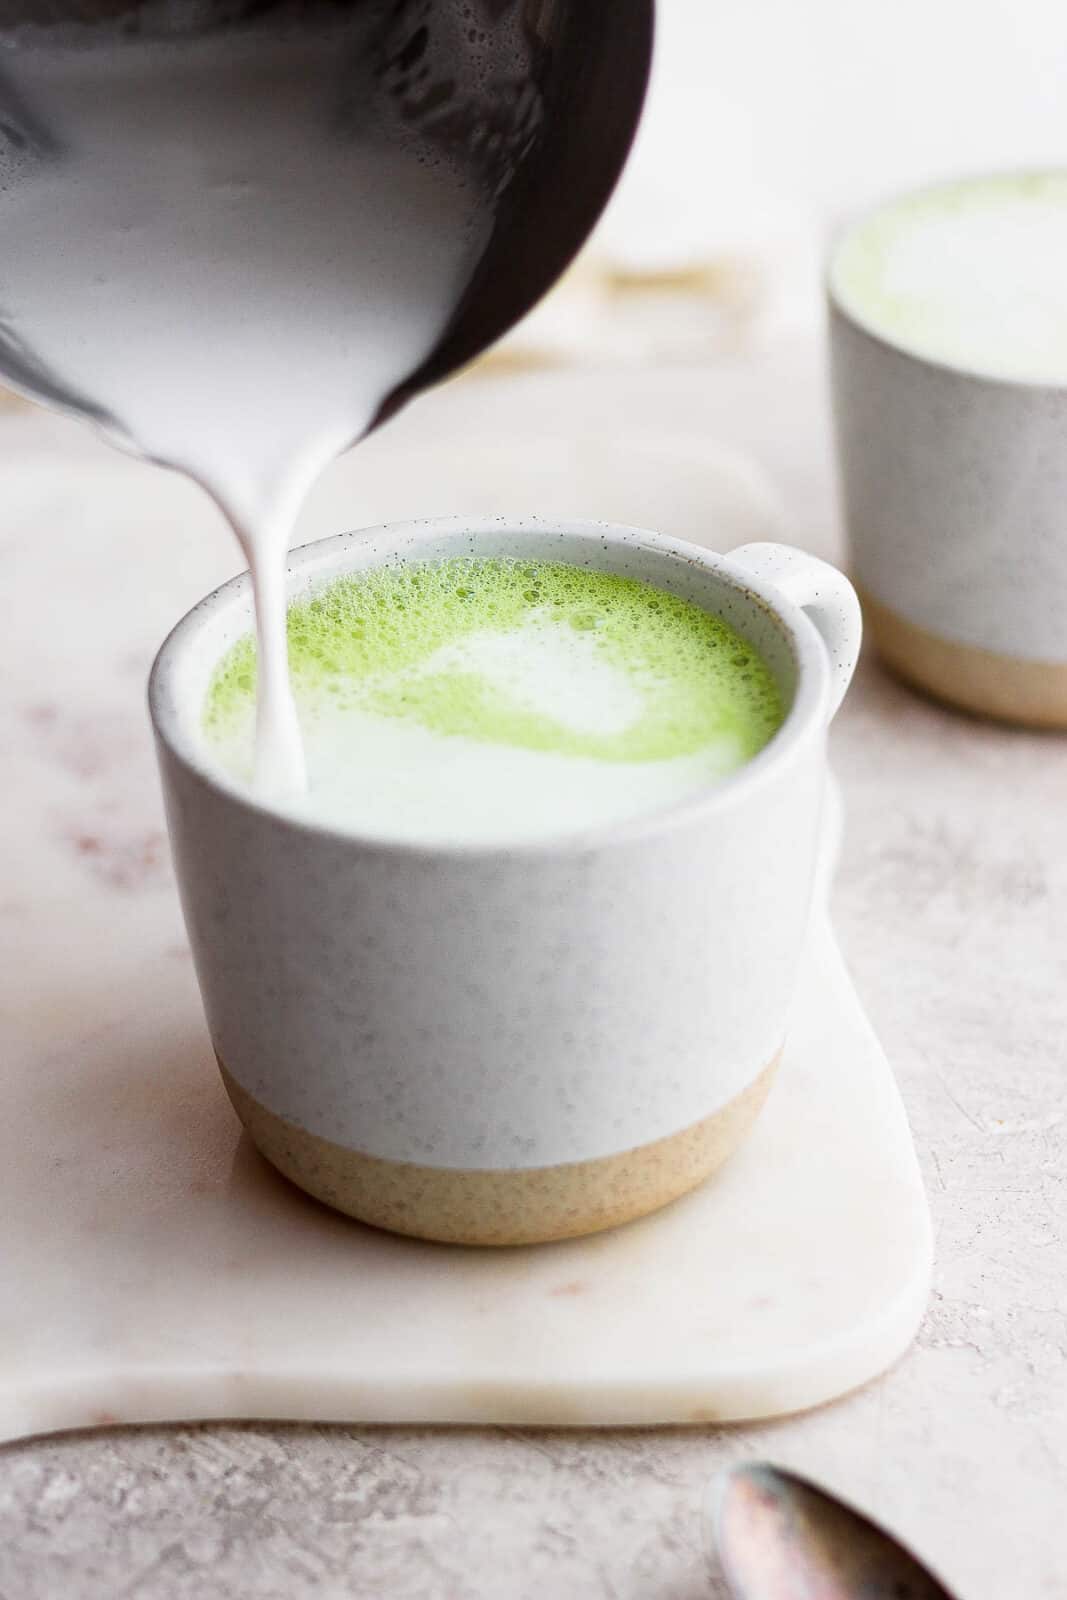 Someone pouring frothed milk on top of the matcha.